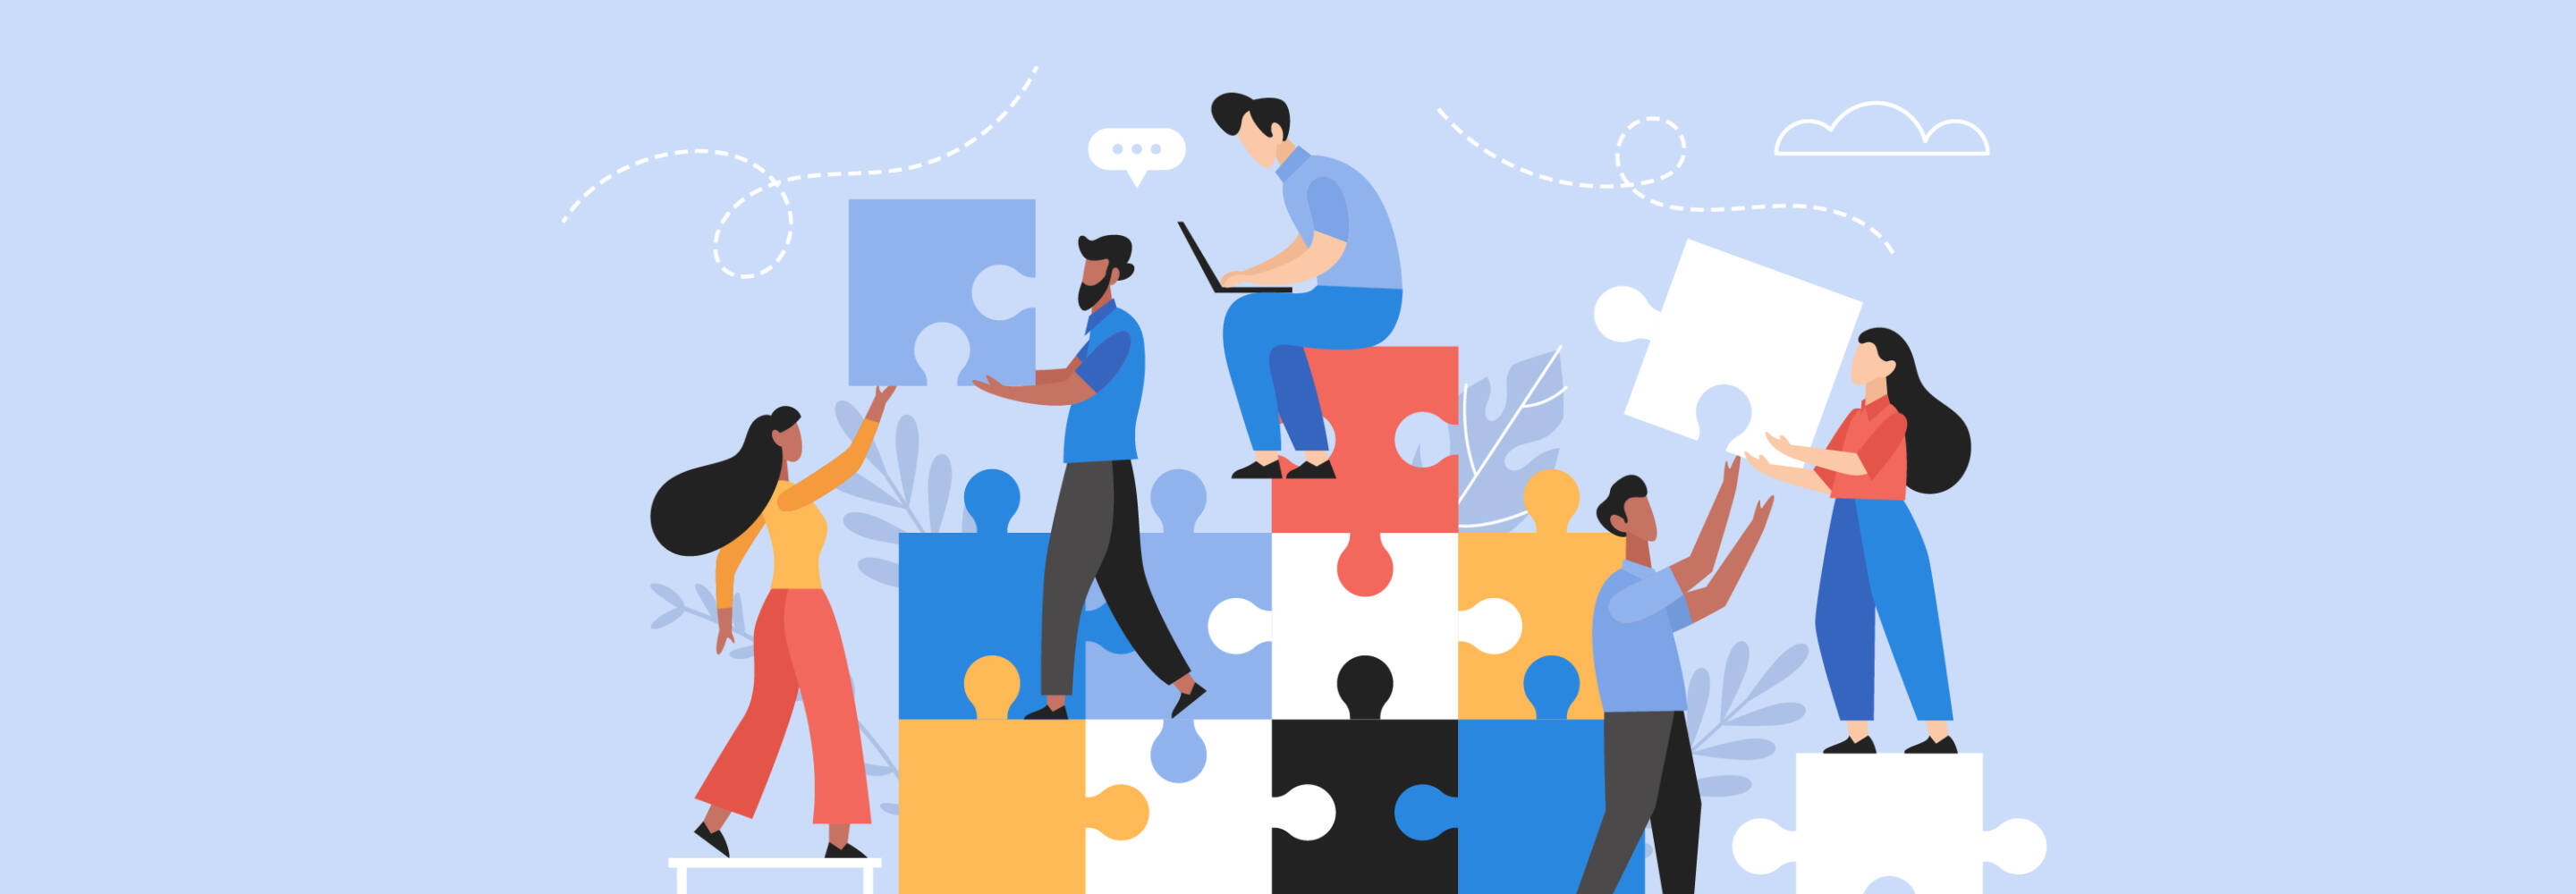 People searching for creative solutions. Teamwork business concept. Modern vector illustration of people connecting puzzle elements